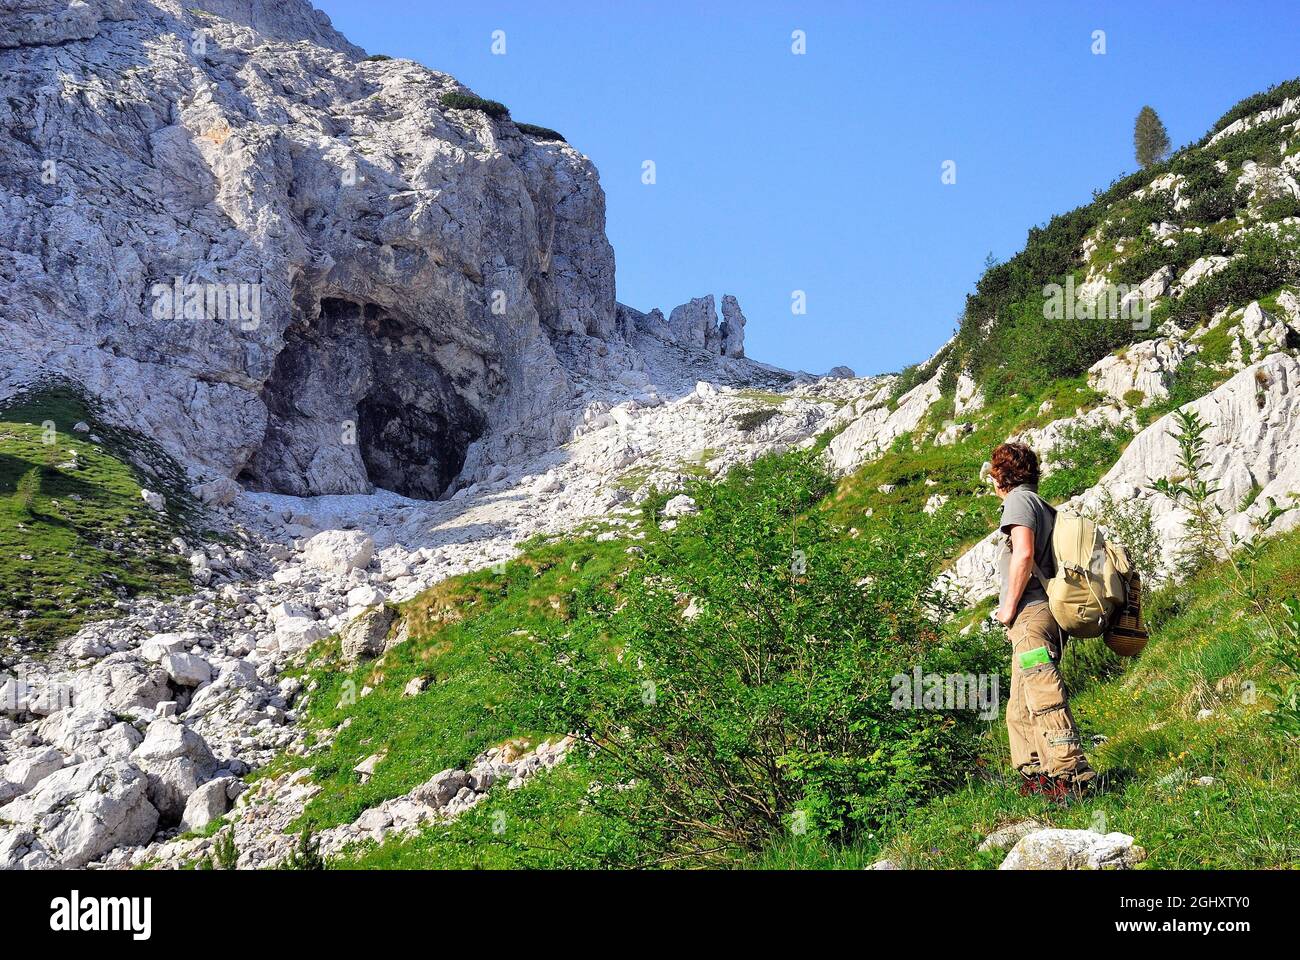 Slovenia, Lepena valley, Triglav National Park. Path for mount Krn and  mount Batognica in a karst environment. North face. A woman trekker. The  demarcated territory by mounts Krn, Batognica and Peski is